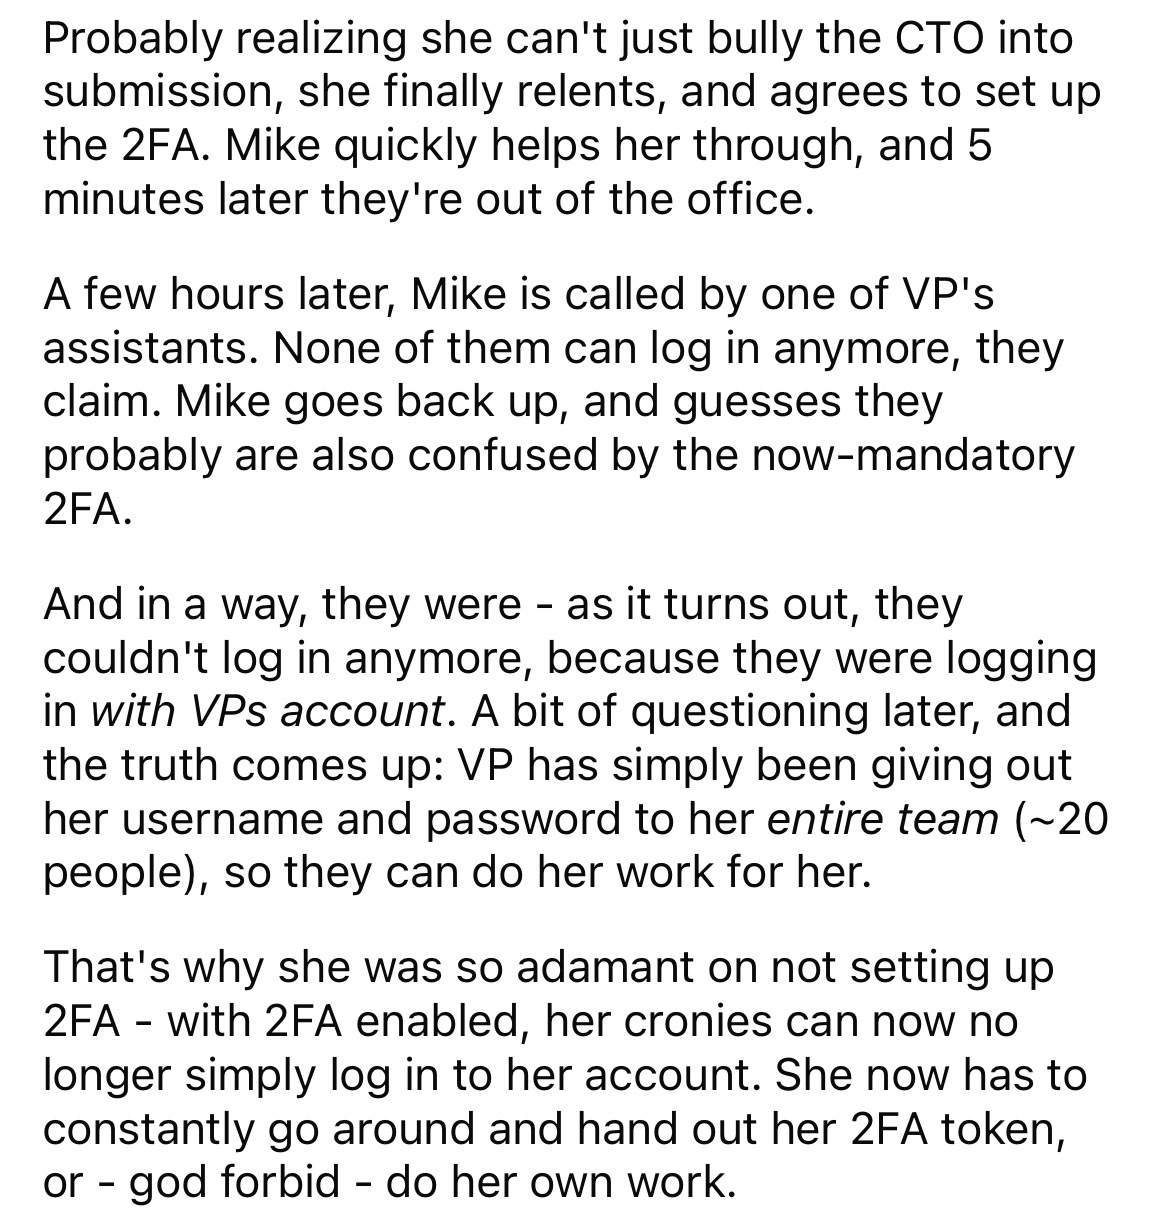 document - Probably realizing she can't just bully the Cto into submission, she finally relents, and agrees to set up the 2FA. Mike quickly helps her through, and 5 minutes later they're out of the office. A few hours later, Mike is called by one of Vp's 